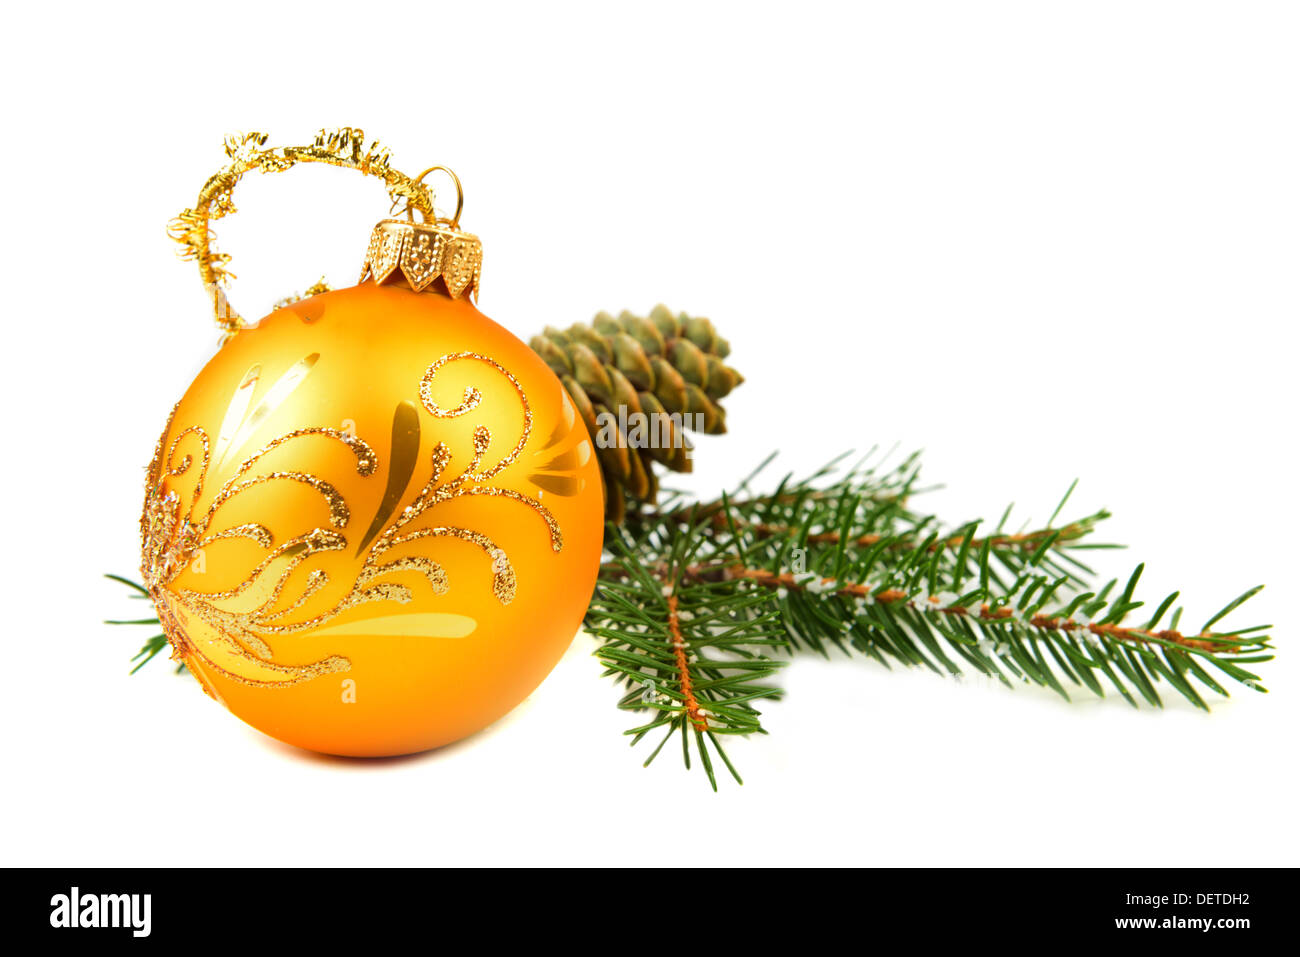 Christmas ball and pine tree branch decoration Stock Photo